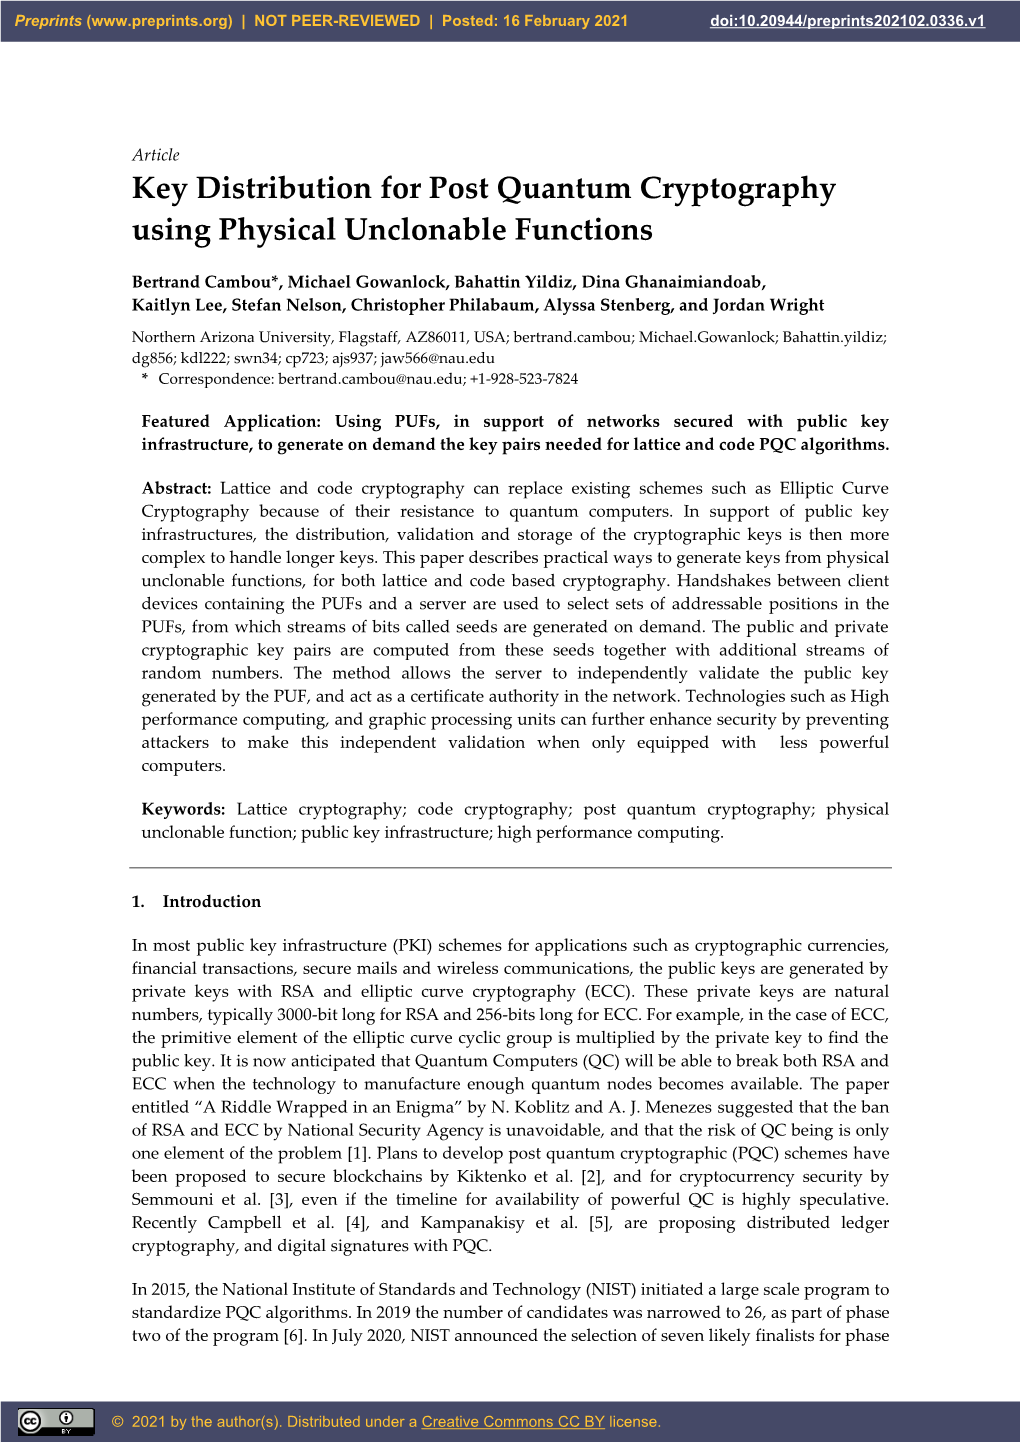 Key Distribution for Post Quantum Cryptography Using Physical Unclonable Functions